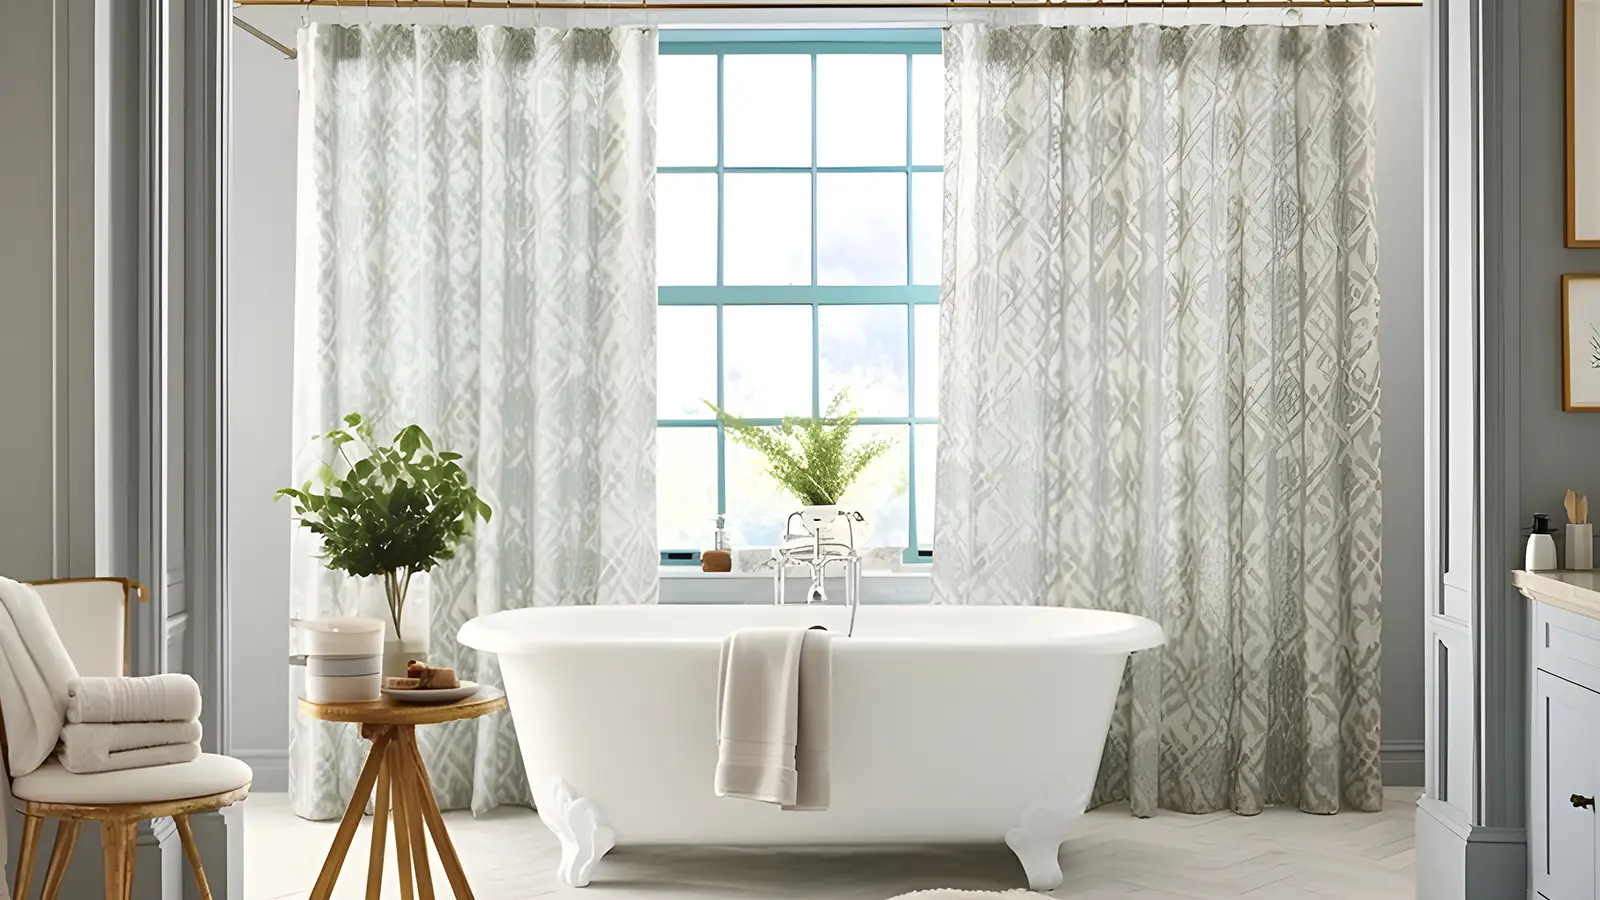 Discover creative ways to decorate an apartment bathroom featuring a tub and a shower curtain.